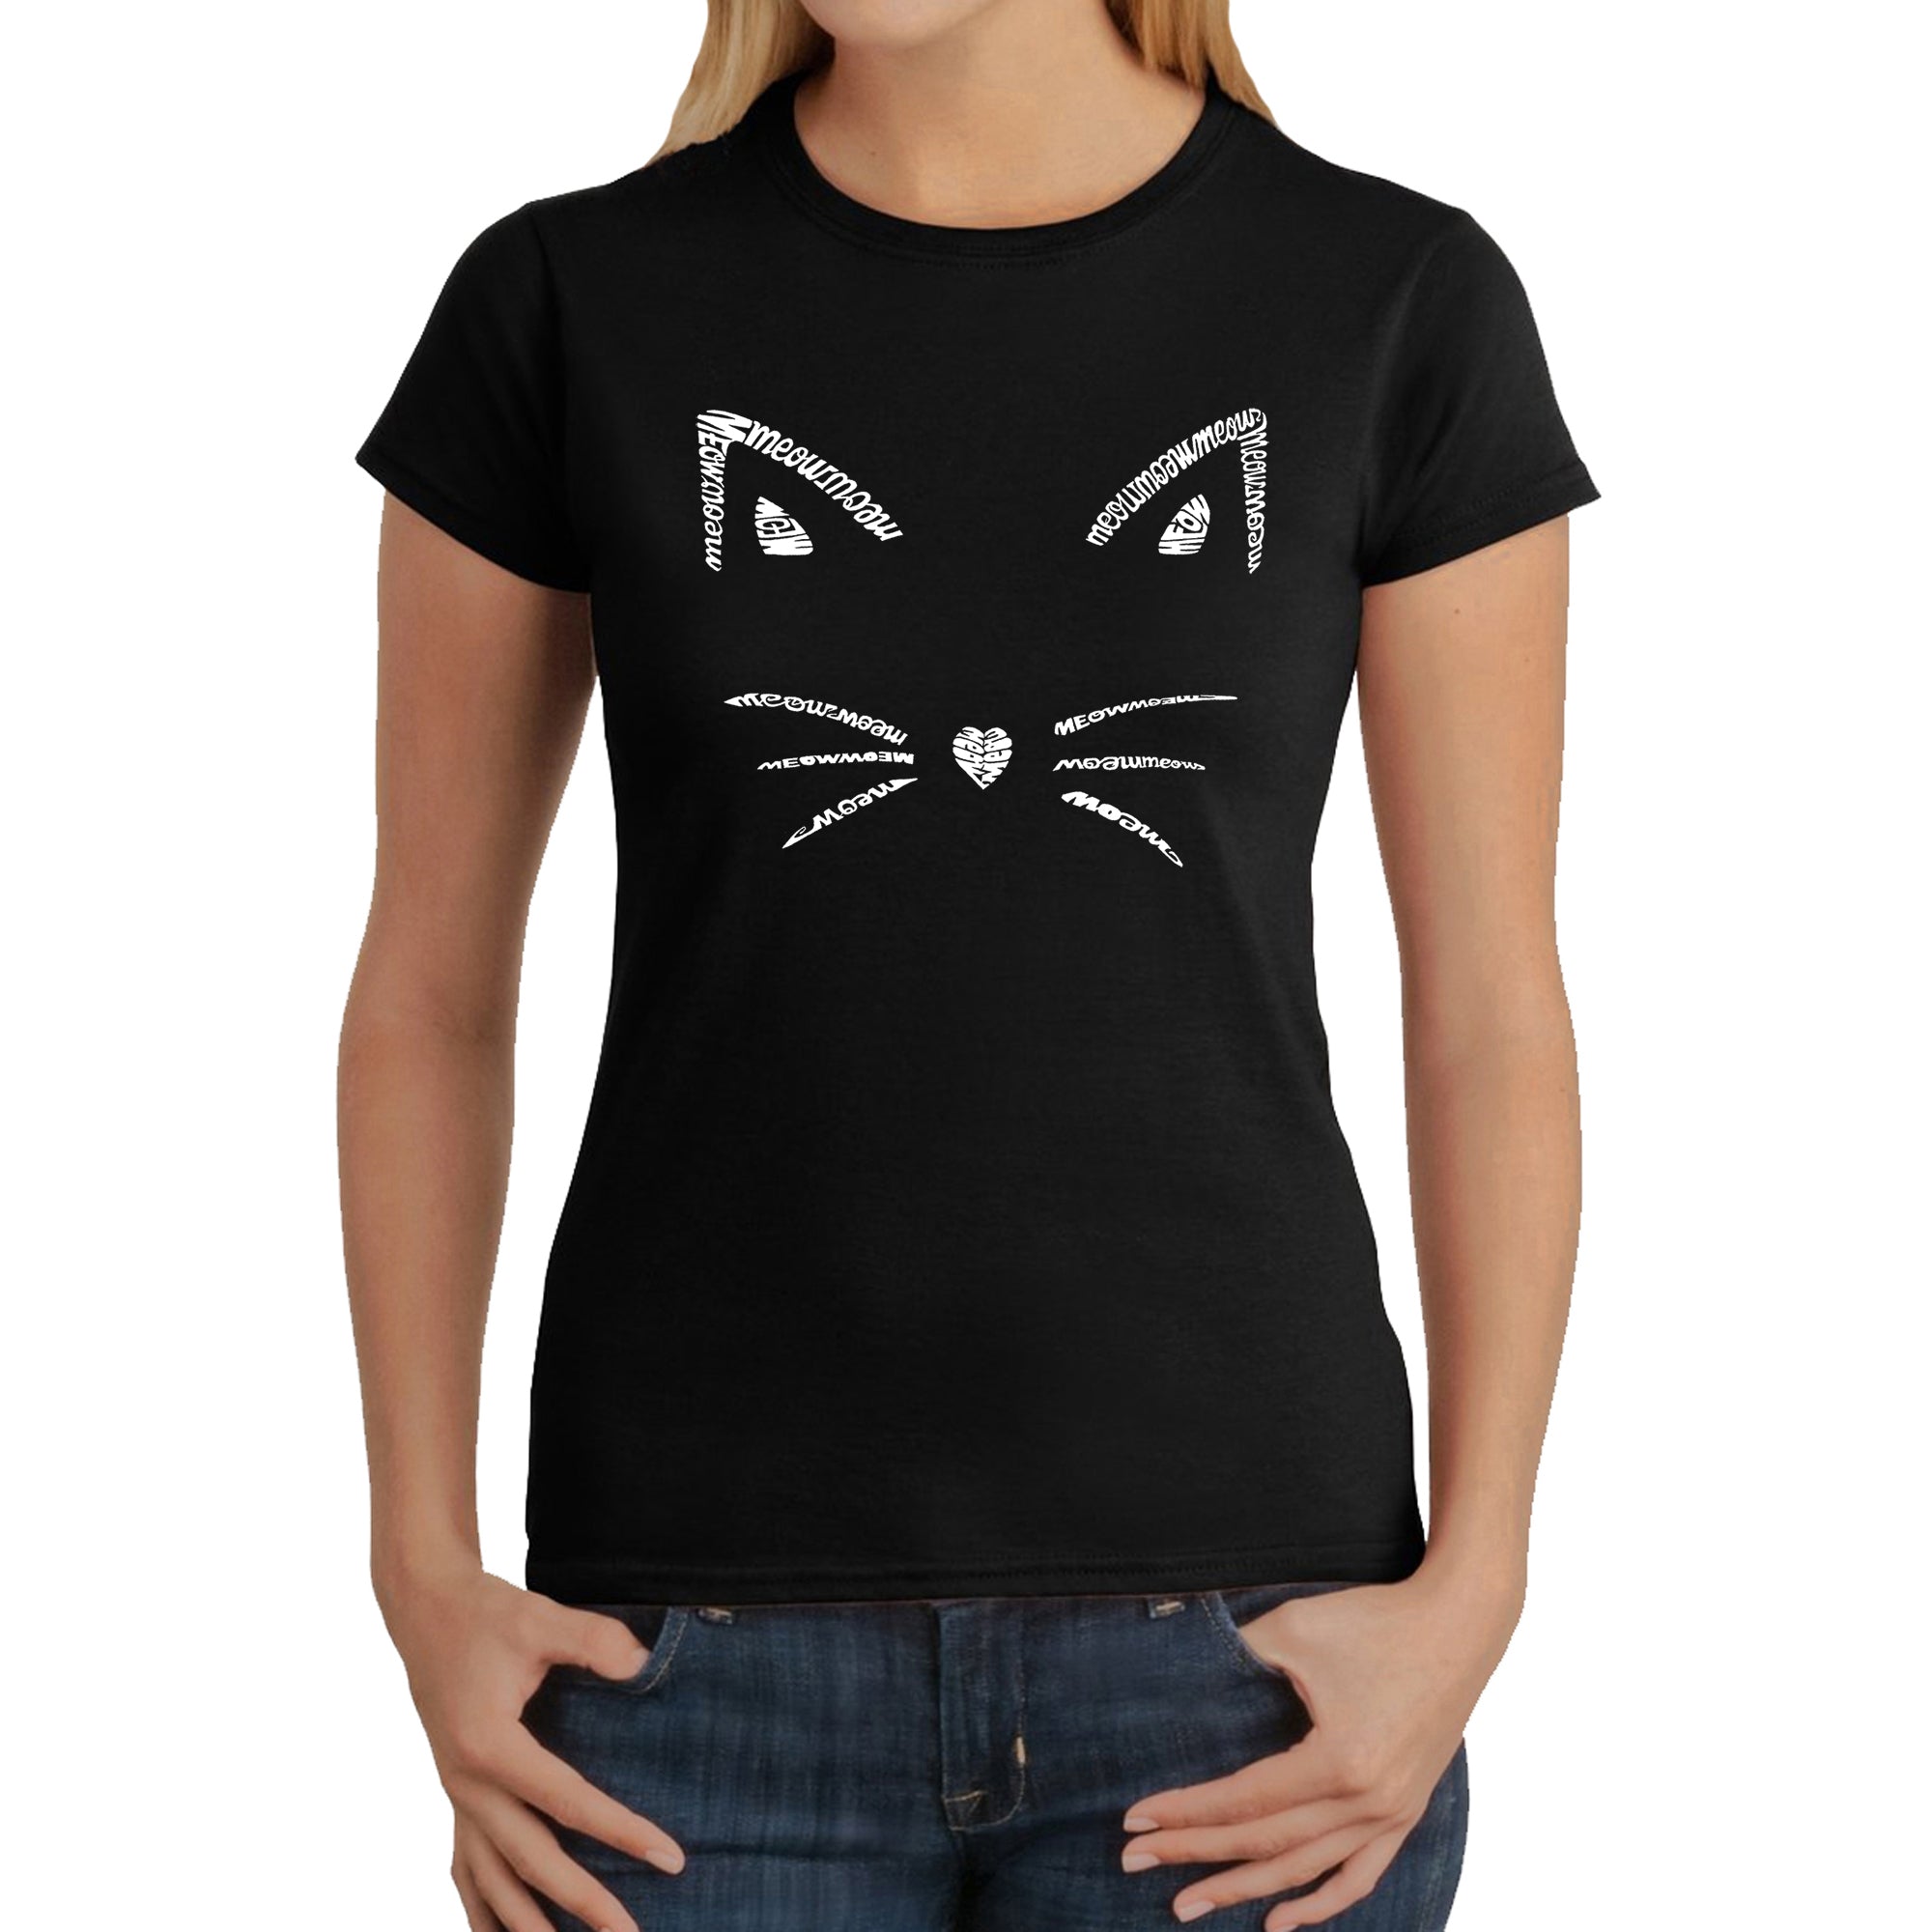 Whiskers - Women's Word Art T-Shirt - Kelly - Small